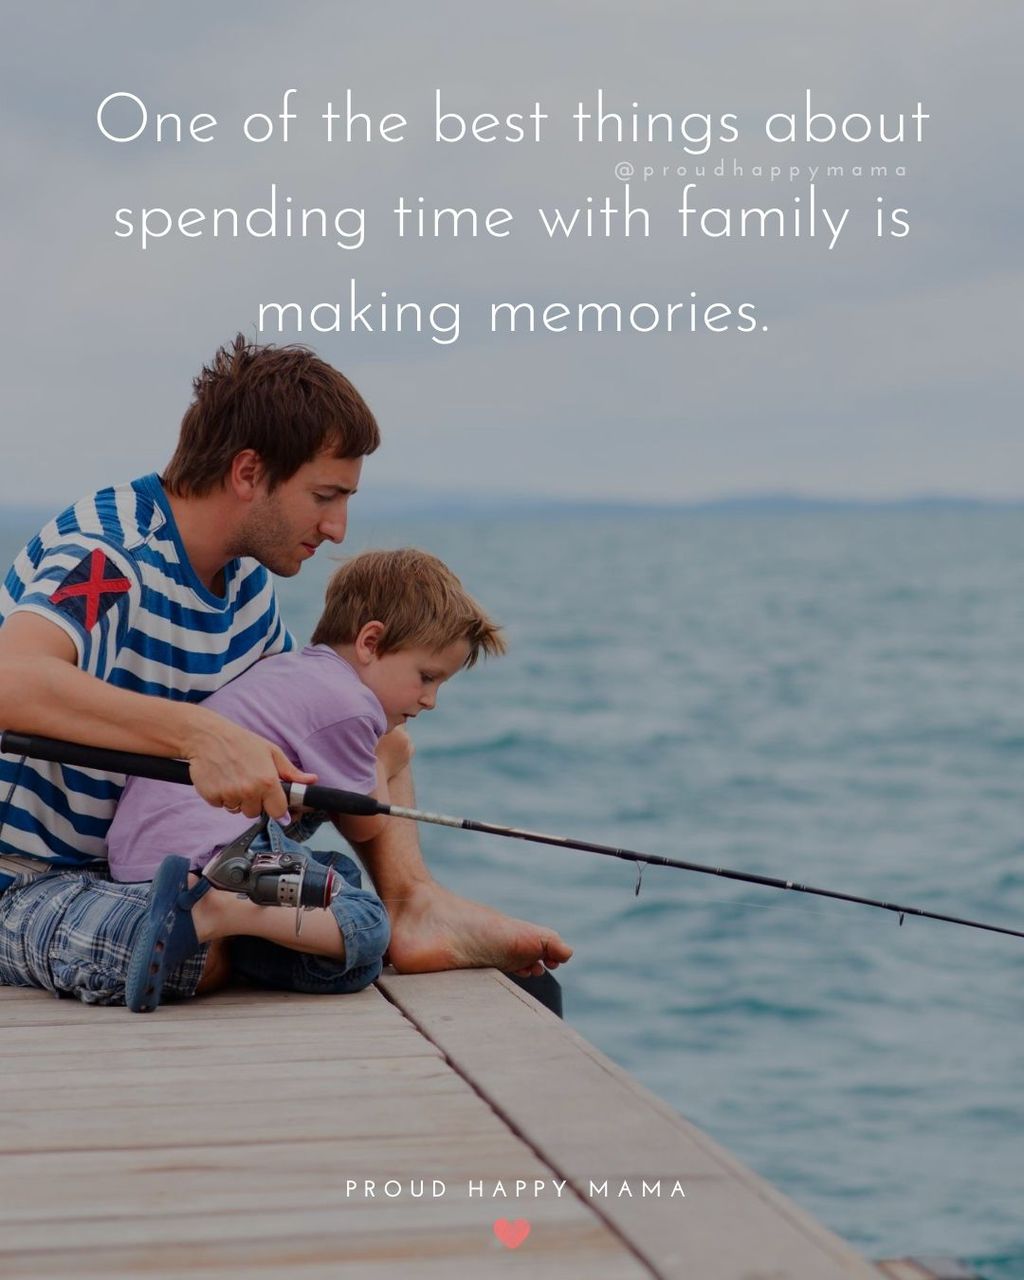 Family Times Quotes | One of the best things about spending time with family is making memories.